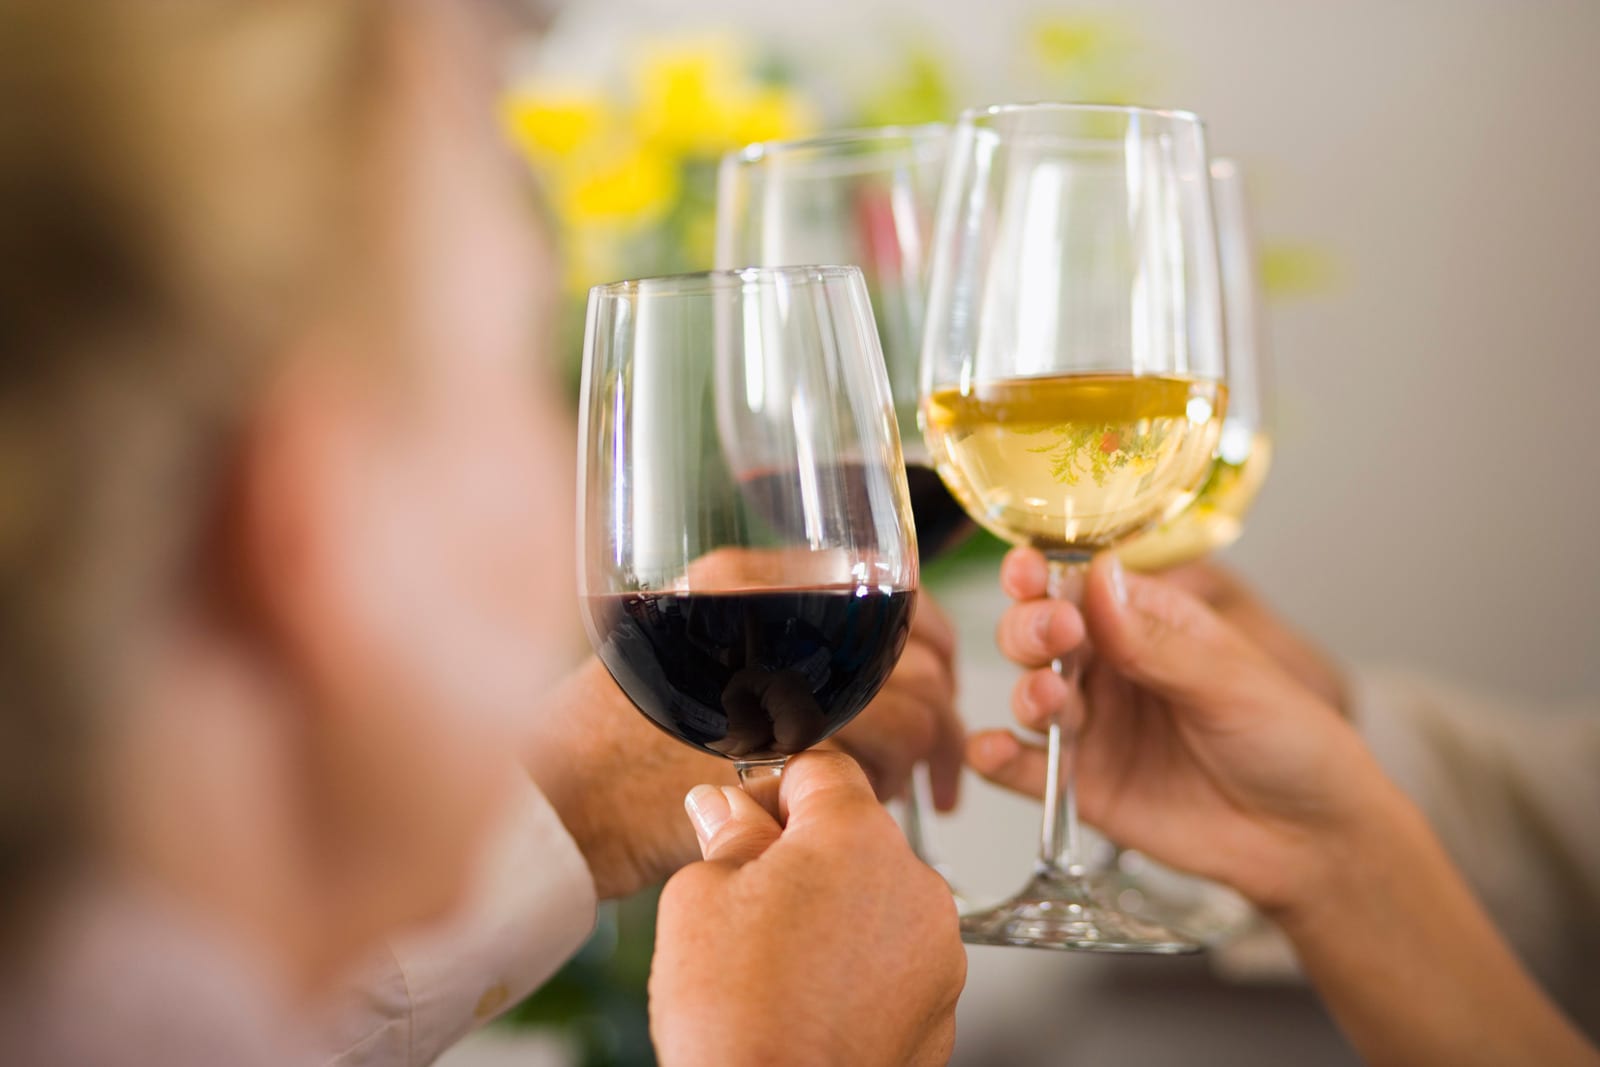 Wine revealed as the UK’s favourite tipple